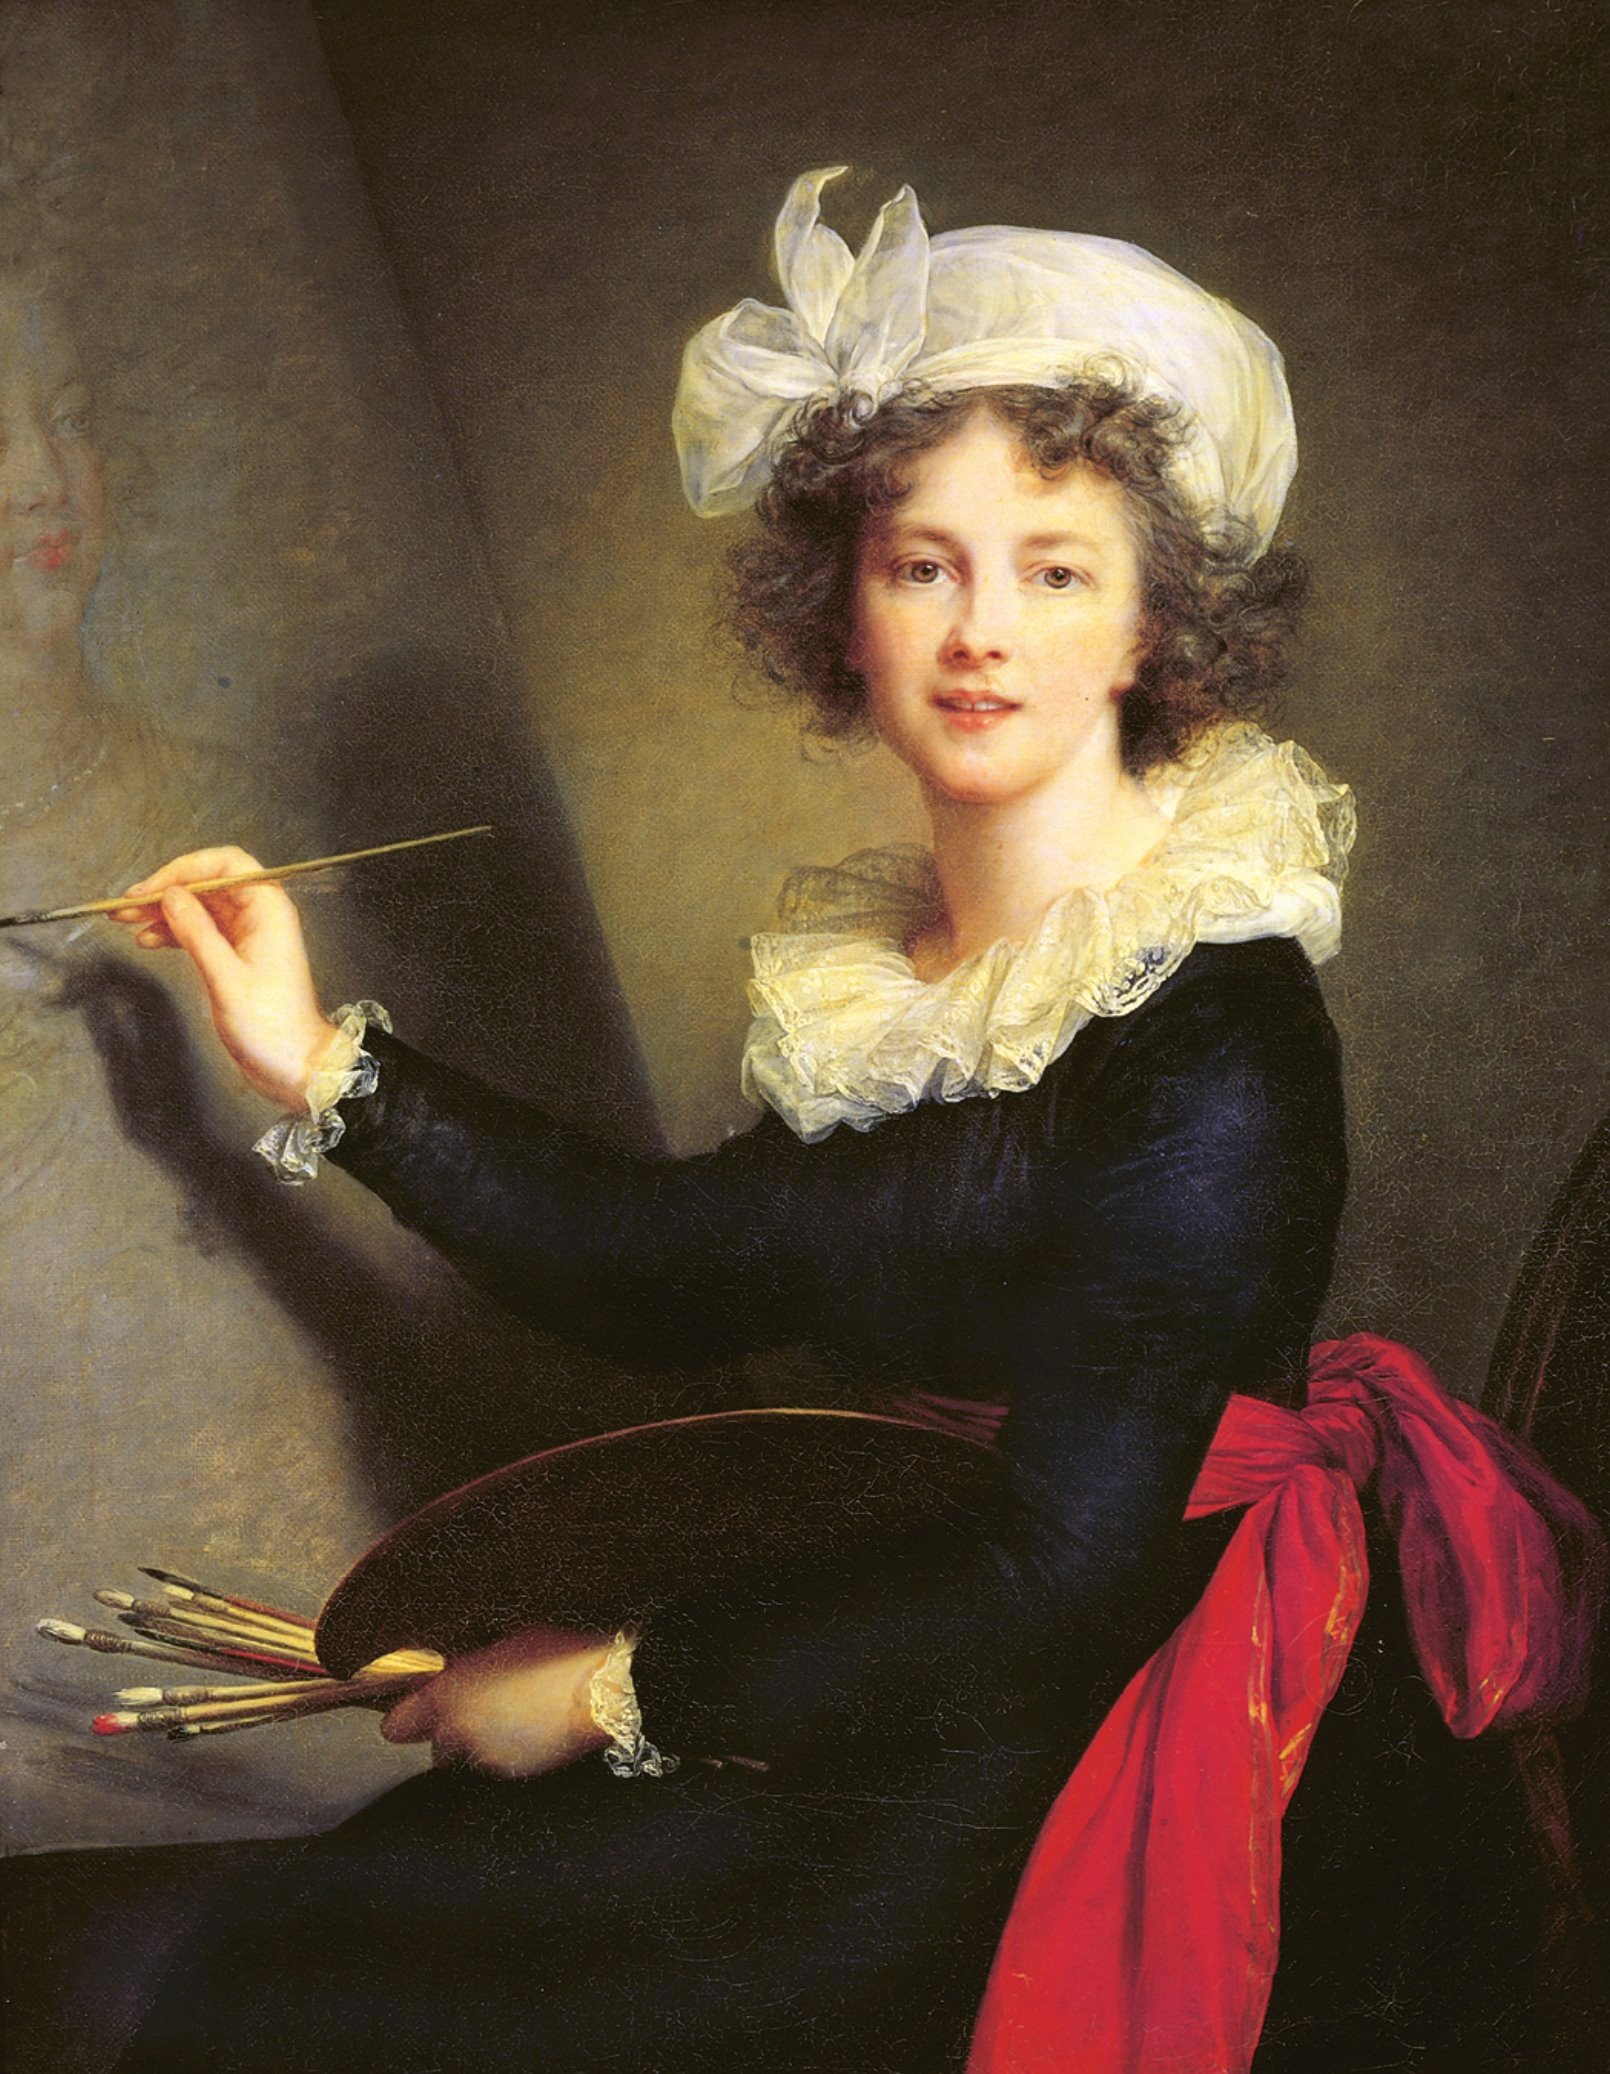 A portrait of a woman painting before an easel looking back at the viewer